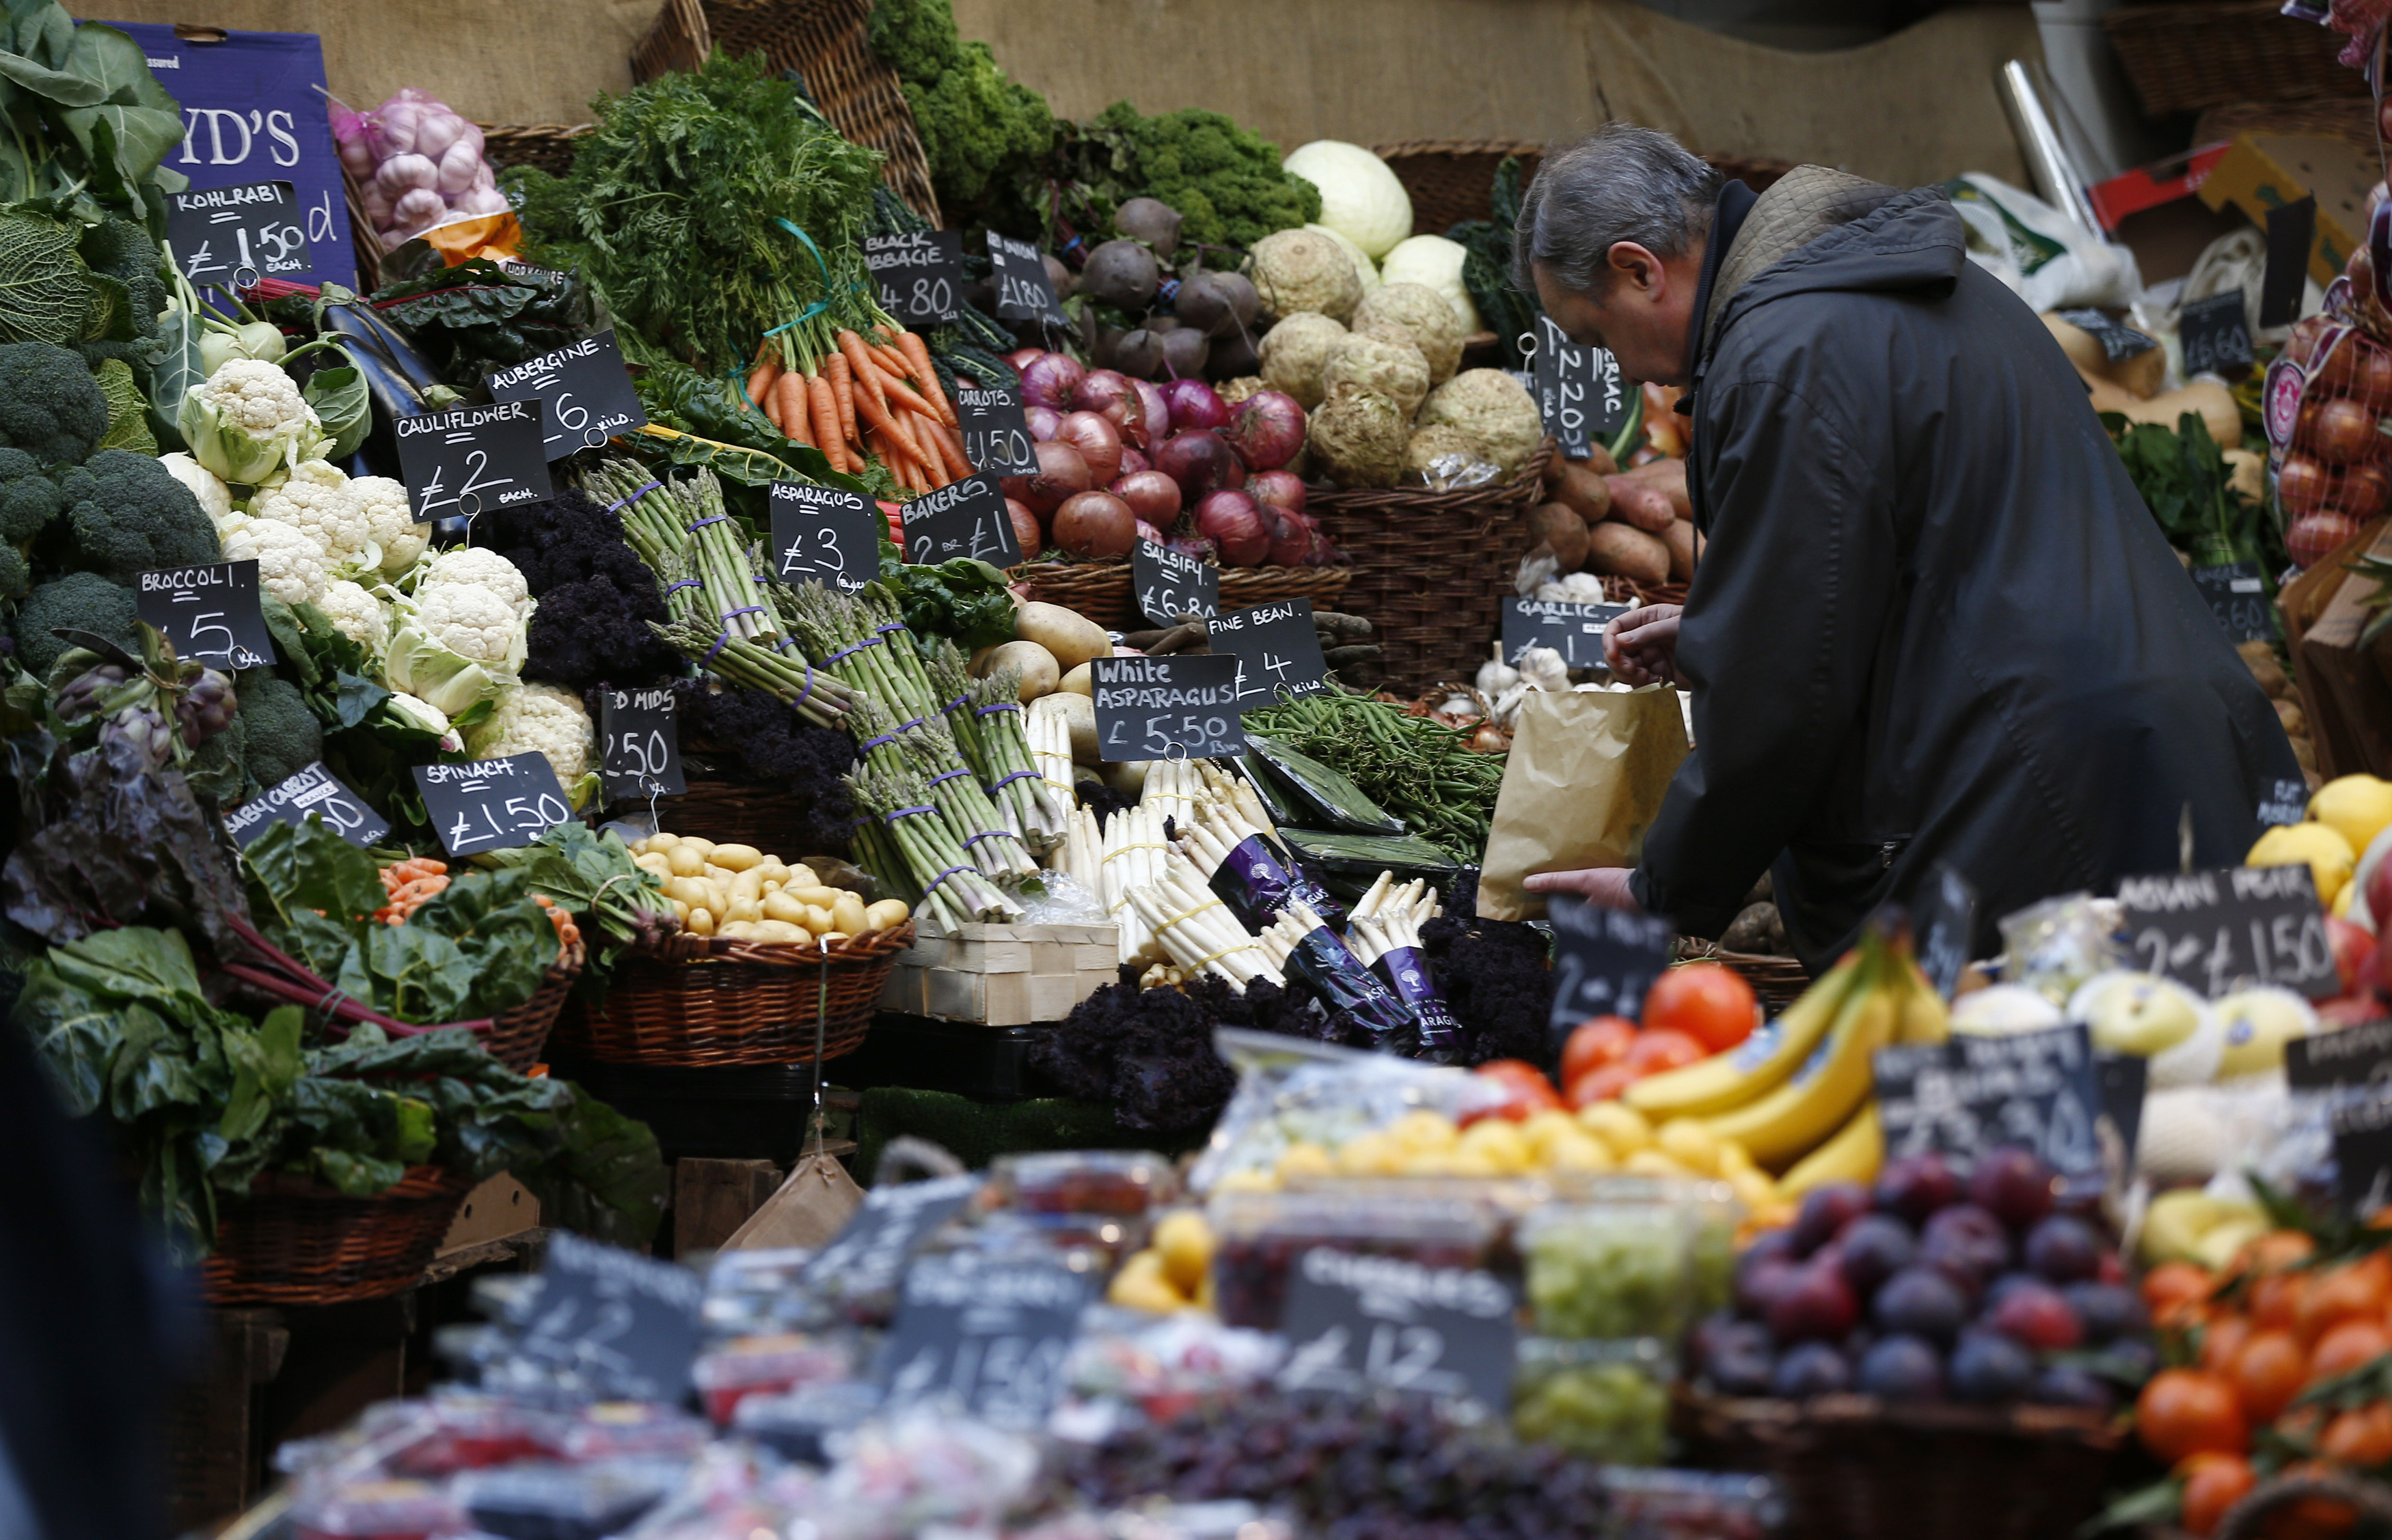 A shopper browses at a vegetable market, in London